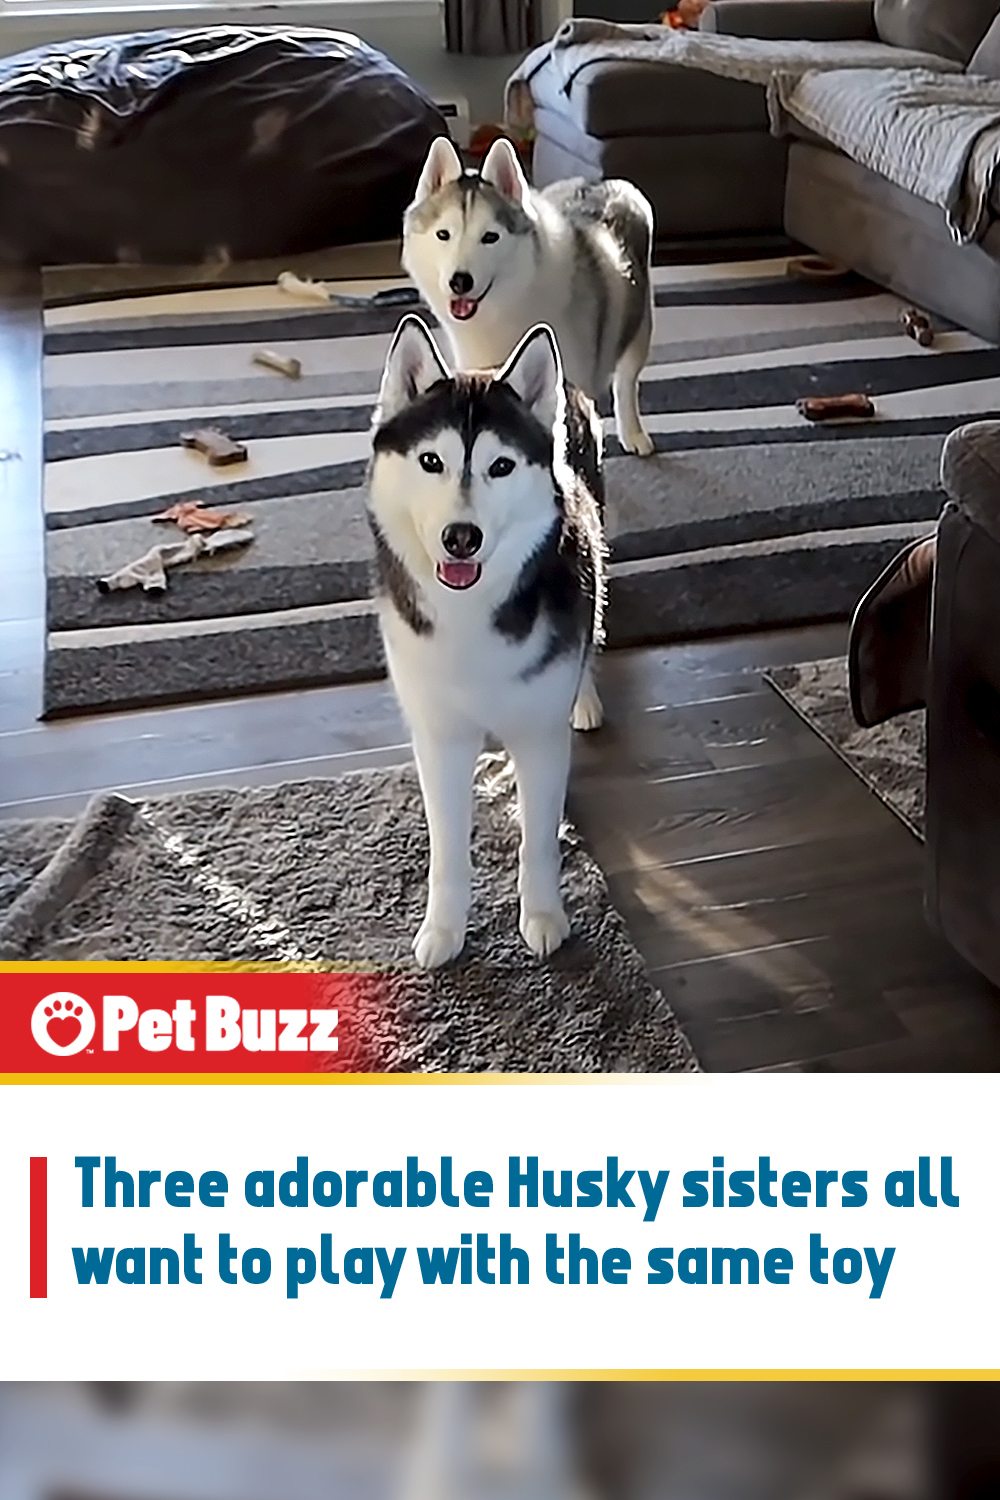 Three adorable Husky sisters all want to play with the same toy